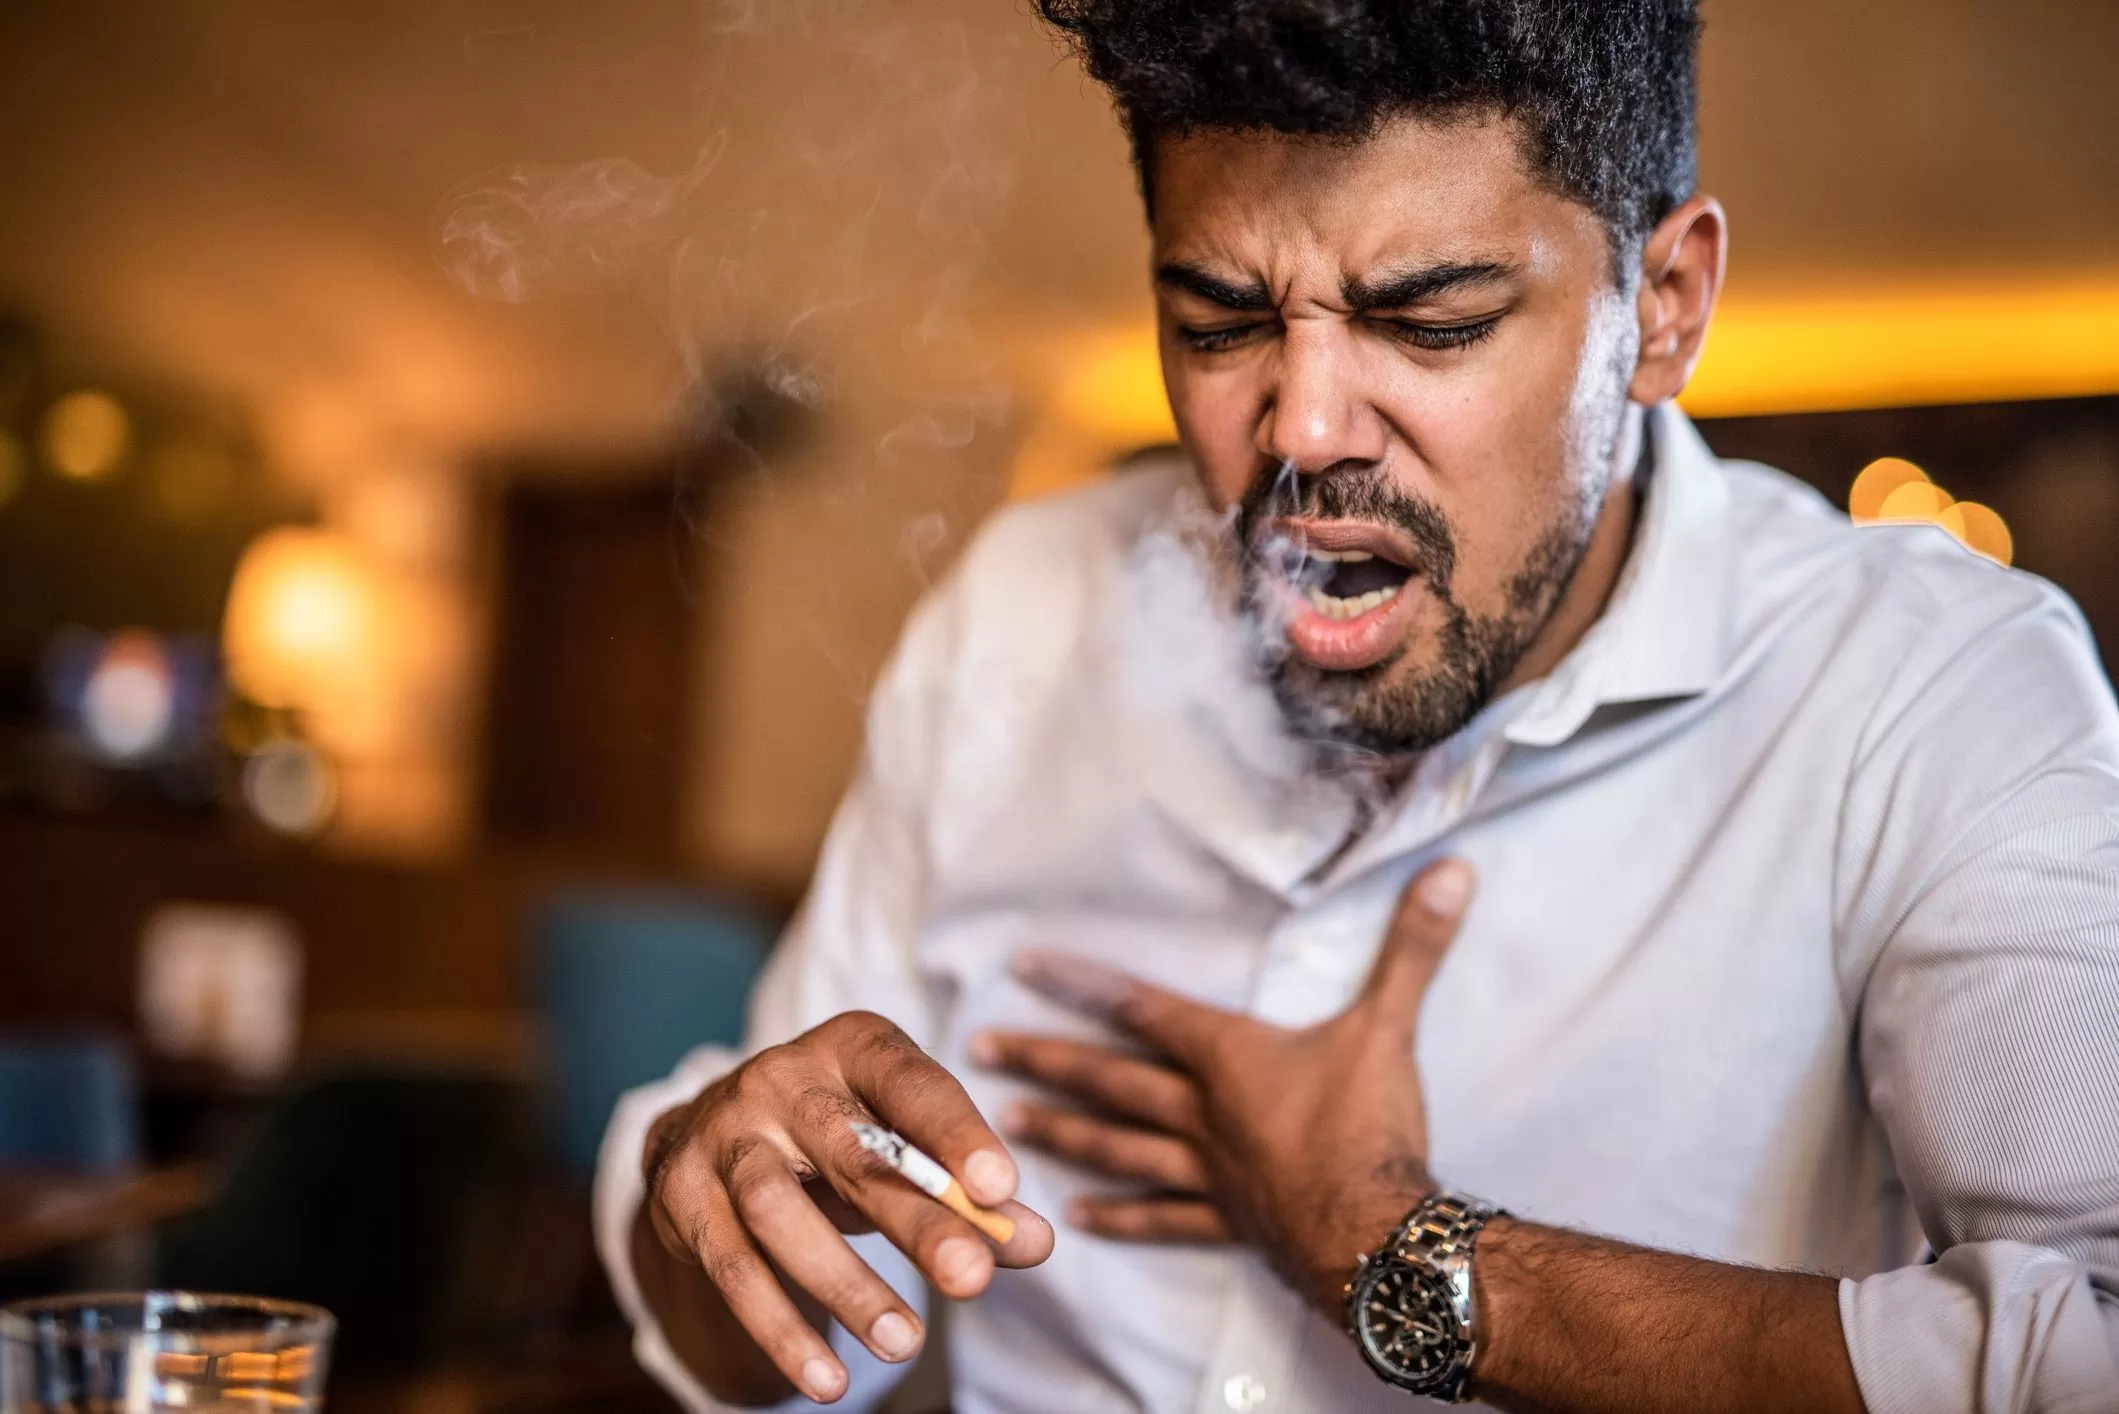 Why Does Smoking Make Us Cough?